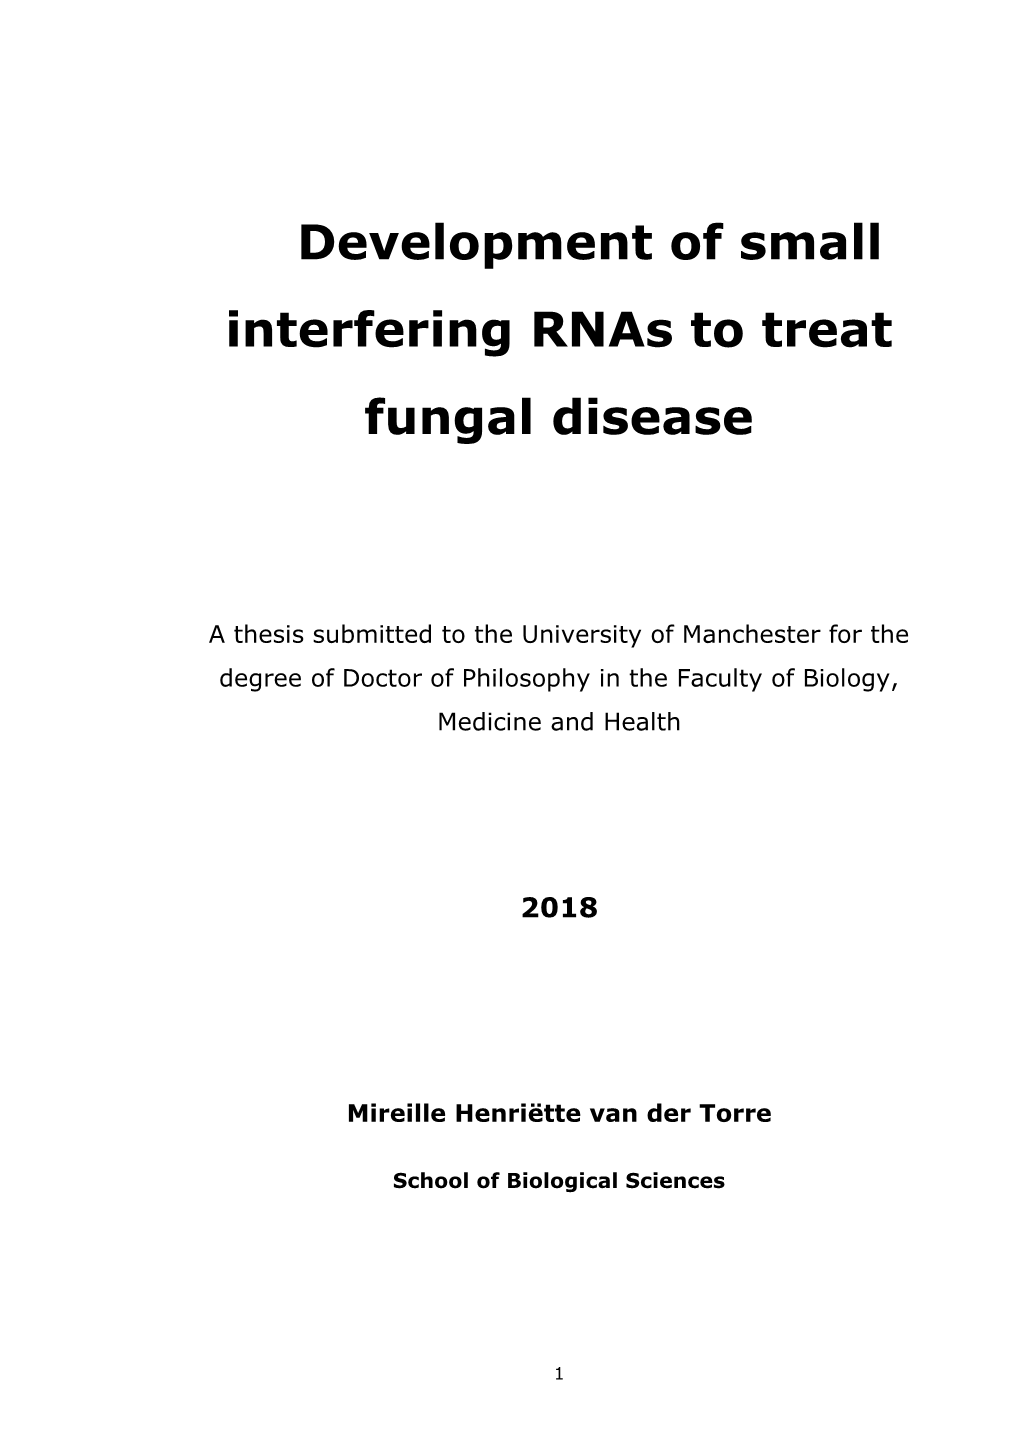 Development of Small Interfering Rnas to Treat Fungal Disease